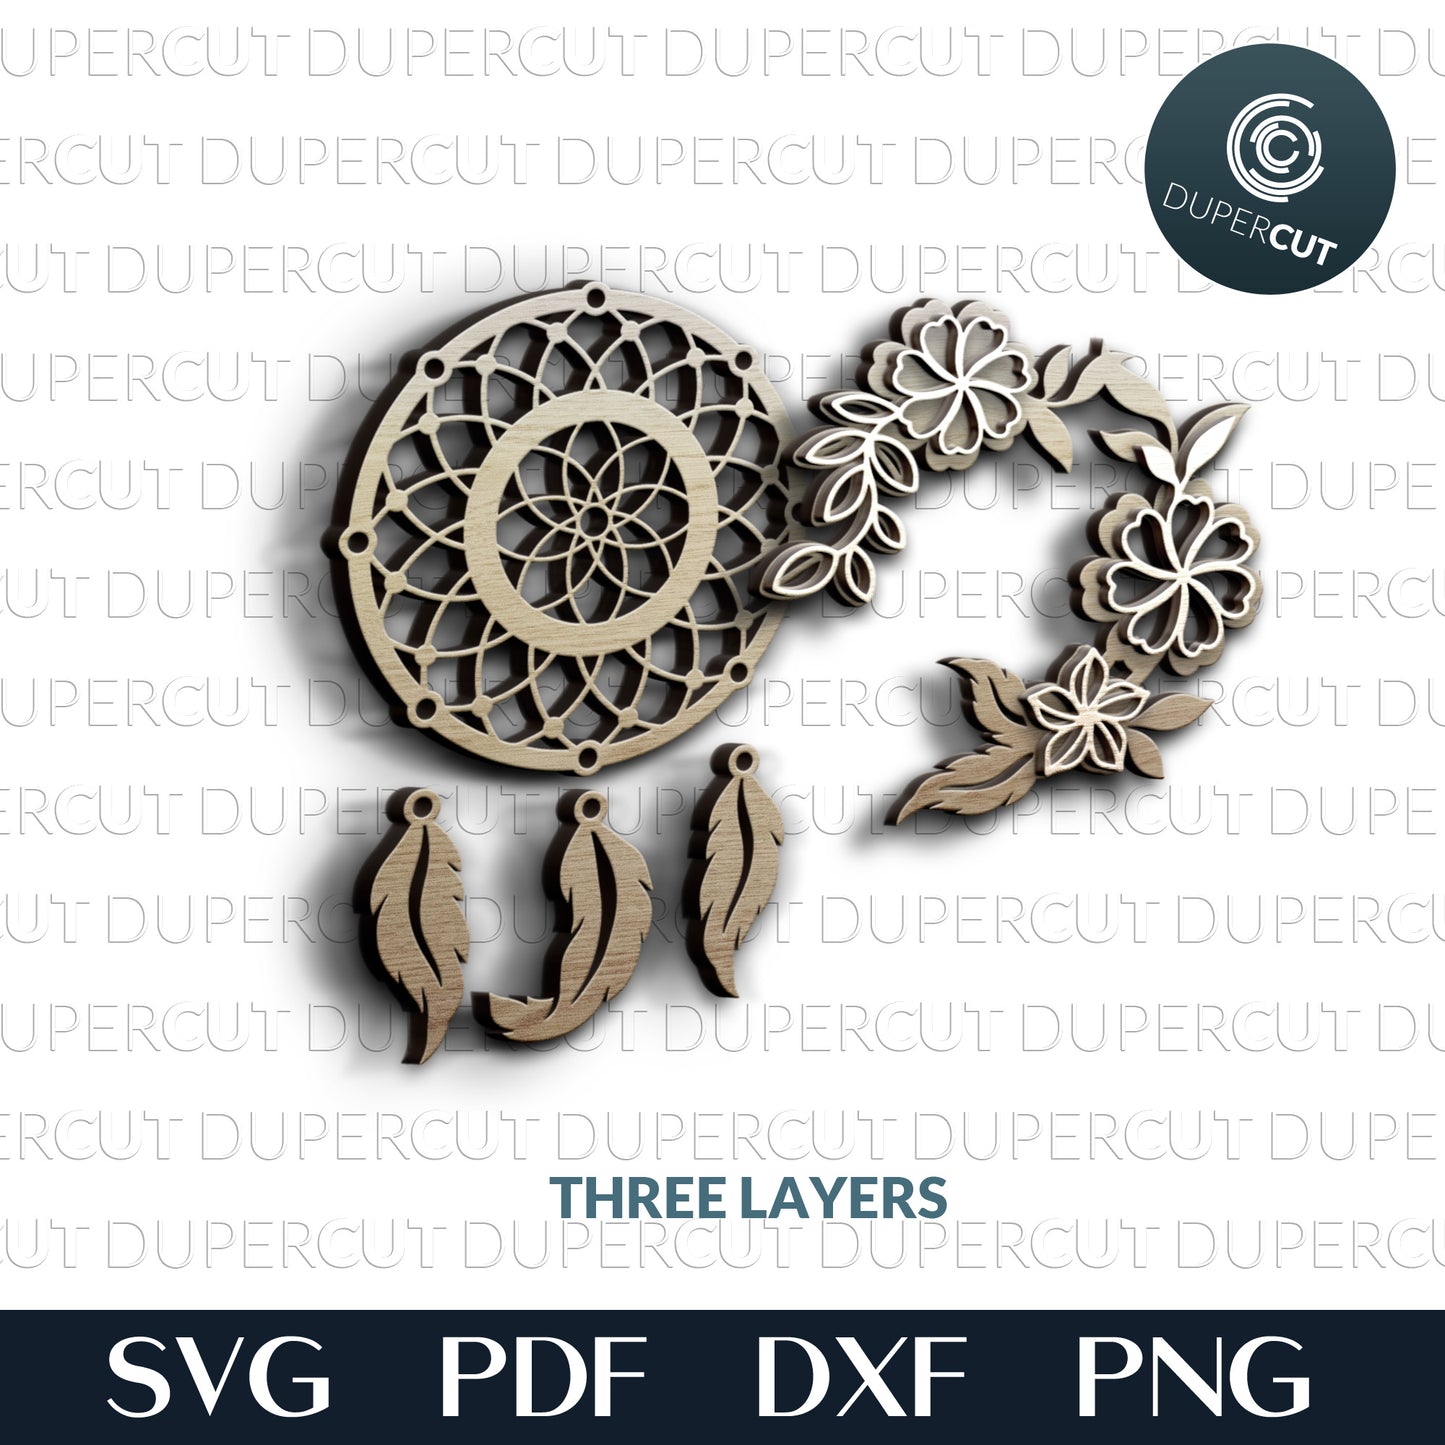 Native American dreamcatcher - layered cutting template - SVG PDF DXF vector files for laser cutting with Glowforge, Cricut, Silhouette Cameo, CNC plasma machines